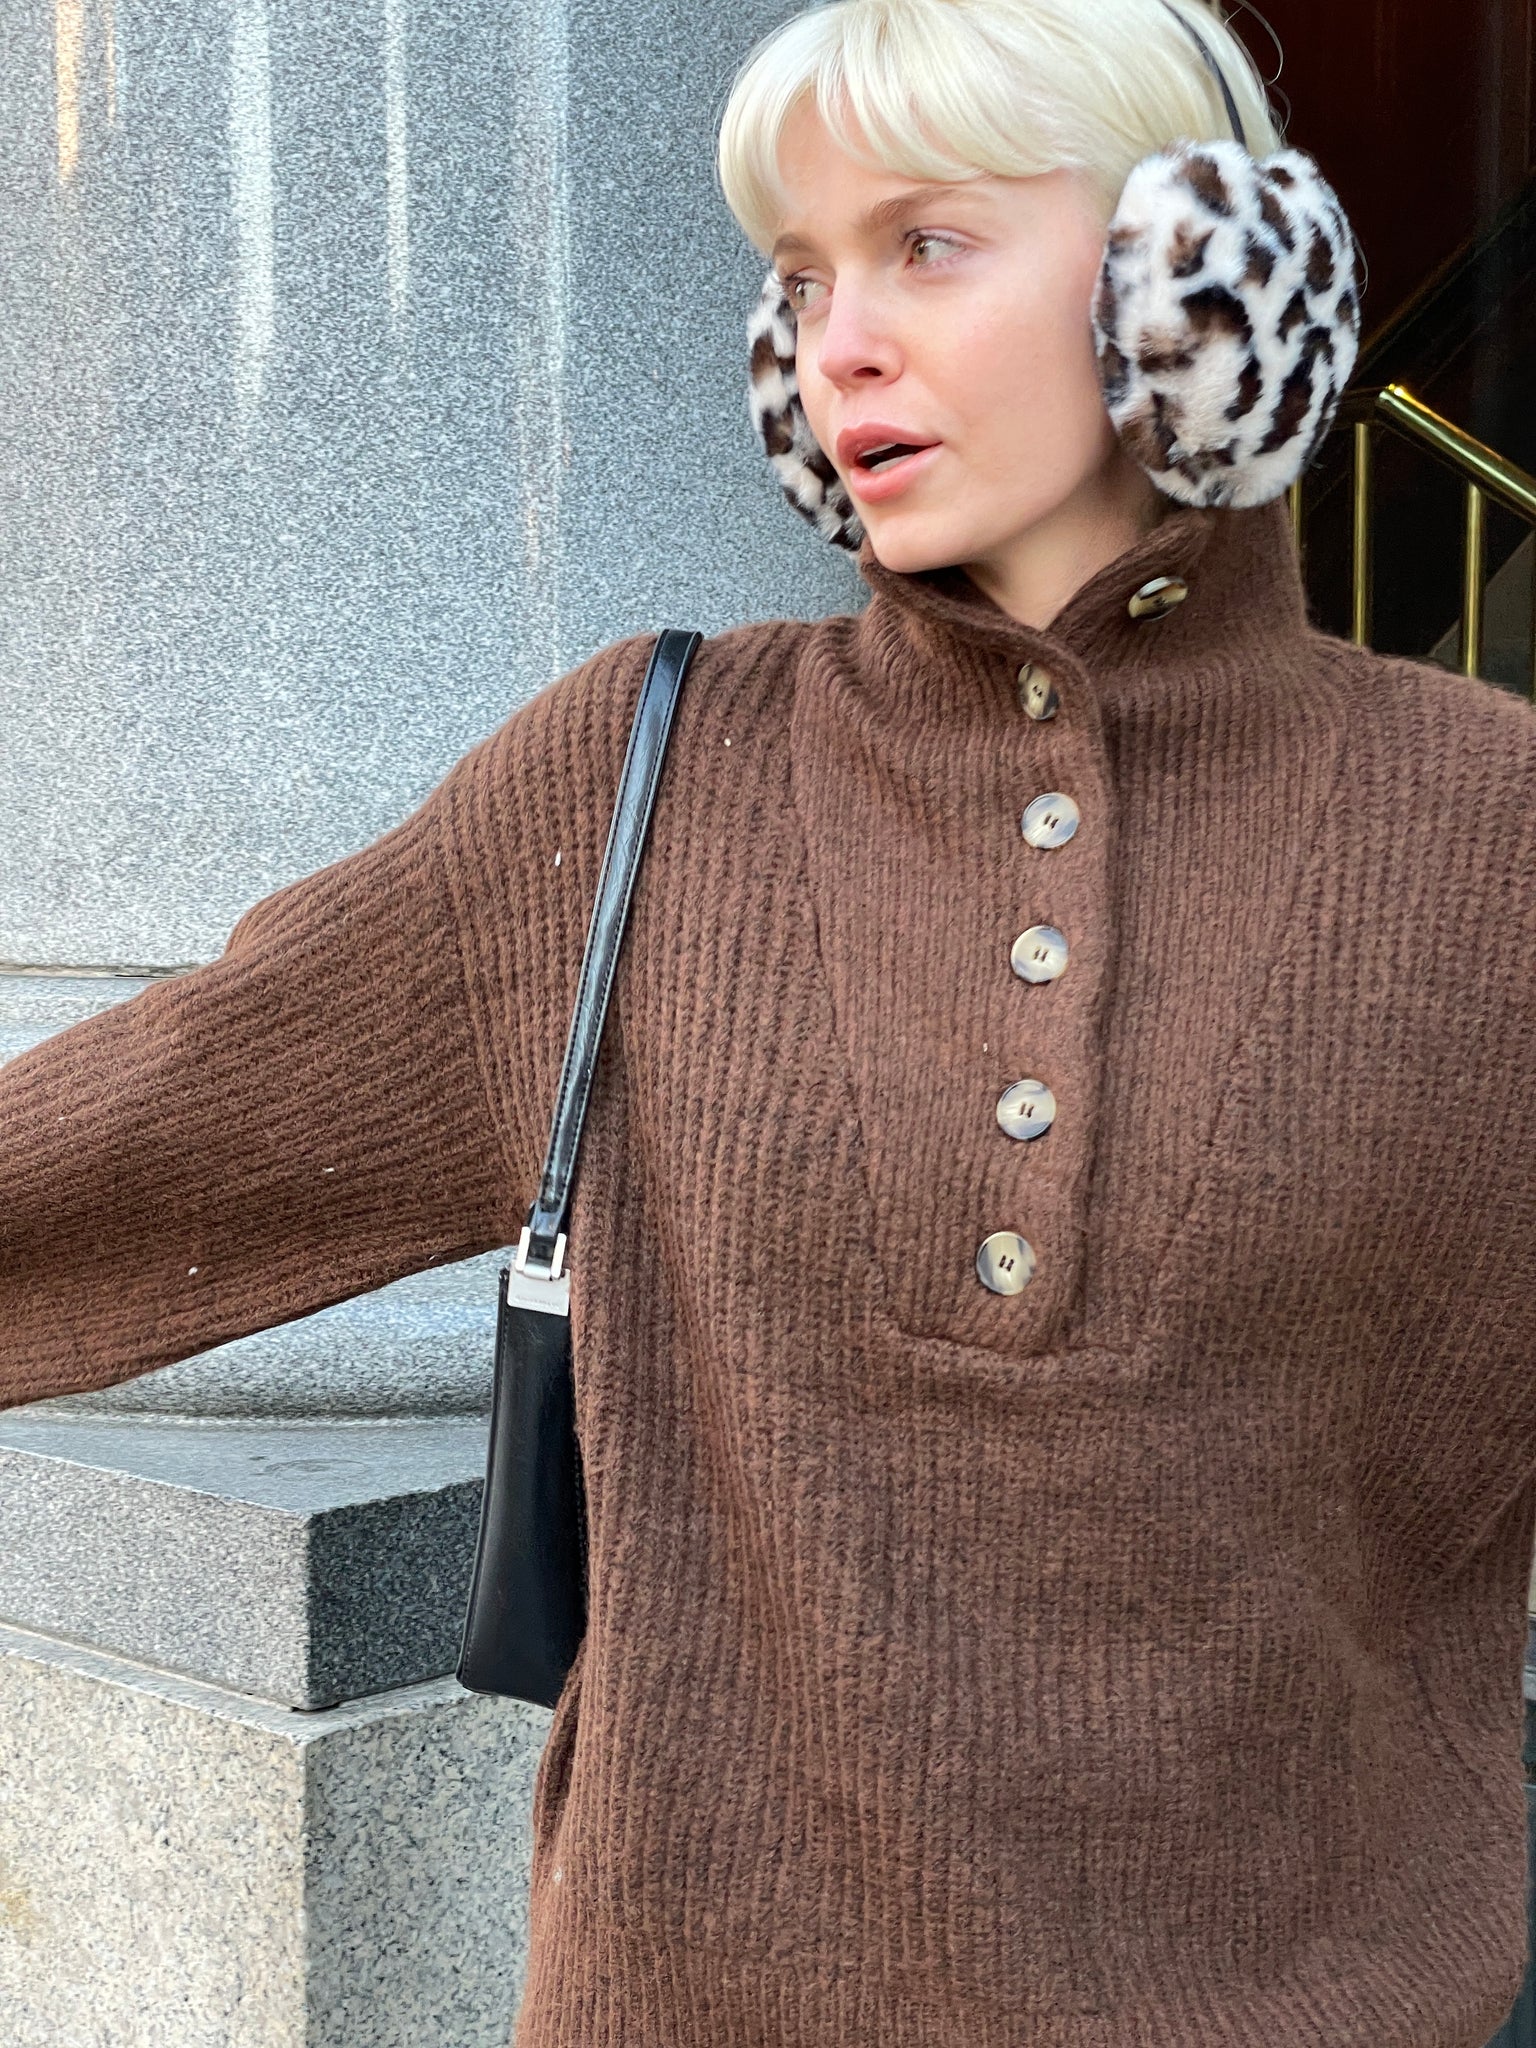 The Carnegie Hill Sweater